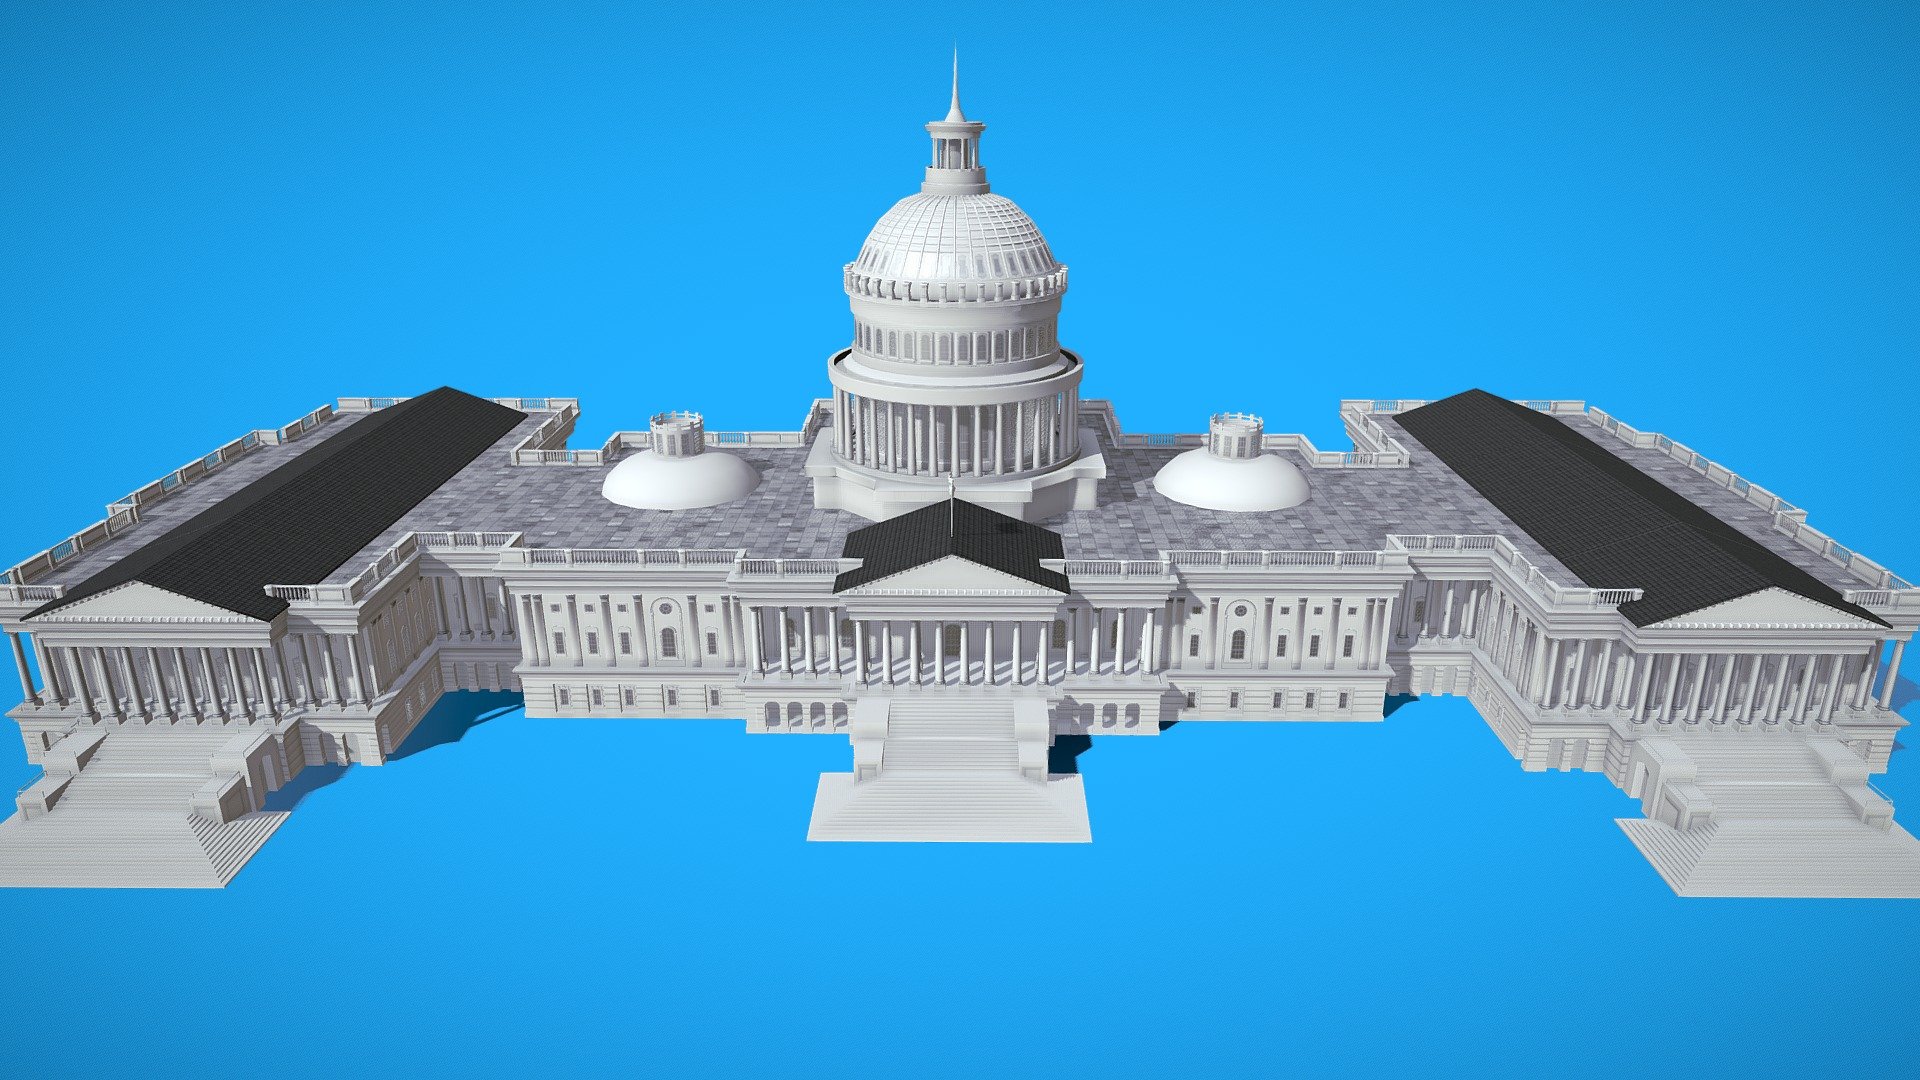 Digital game low poly 3d model of the U.S. Capitol

INFO: 
1) Game model ready for export in Unreal engine 
2) coordinates of the location of the model in space (x0, y0, z0) 
3)  All objects have names 
4) All textures and materials are also named 
5) The model is in real scale, system units - cm 
6) Original file format - max 2014

Textures: 4 folders
 Big_home: 
1) mask_big_home PNG - 4096x4096 
2) t_big_home_ao

3) t_big_home_diffuse 
4) t_big_home_normal 
5) t_big_home_spec
6) wareframes_big_home 

Columns_steps: 
1) mask_Column_steps PNG - 4096x4096 
2) t_Column_ao 
3) t_Column_normals 
4) wareframe_Column_steps

Dome: 
1) mask_Dome PNG - 4096x4096 
2) t_dome_ao 
3) t_dome_diffuse 
4) t_dome_normal 
5) t_dome_specular 
6) wareframes_Dome 

Windows: 
1) mask_windows PNG - 4096x4096 
2) t_windows_ao 
3) t_windows_Diffuse 
4) t_windows_normals 
5) t_windows_spec 
6) wareframes_windows - United States Capitol low poly - Buy Royalty Free 3D model by omg3d 3d model